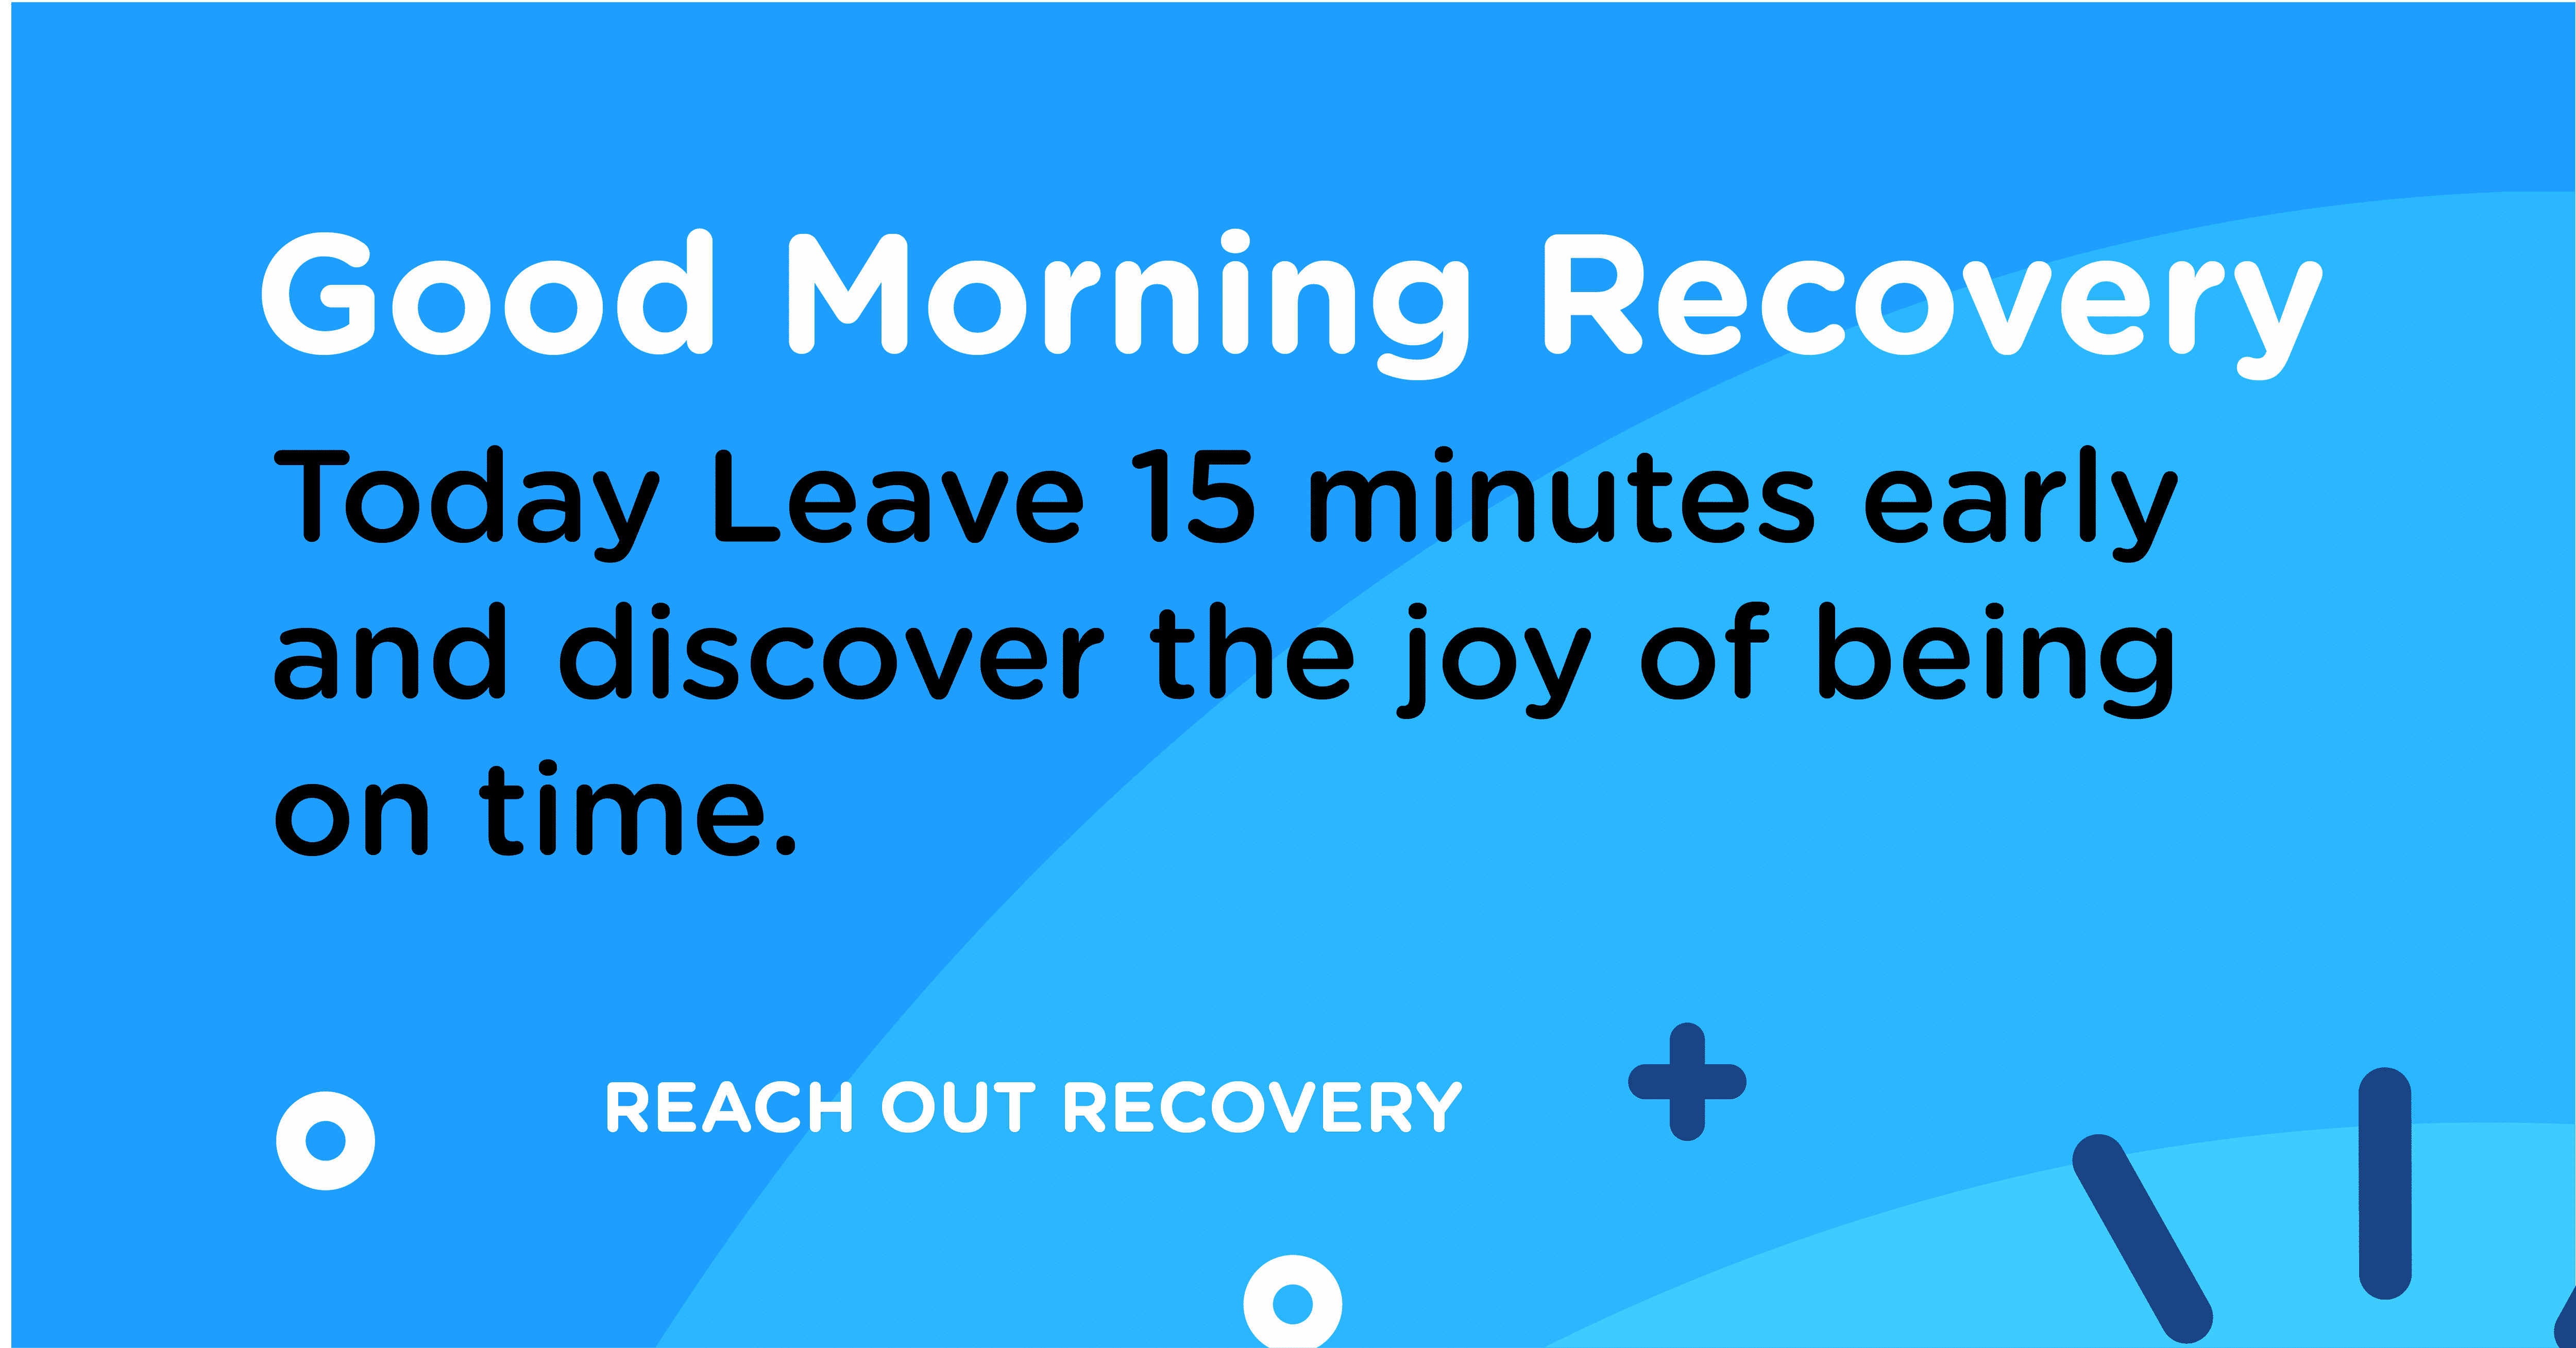 Good Morning Recovery On time